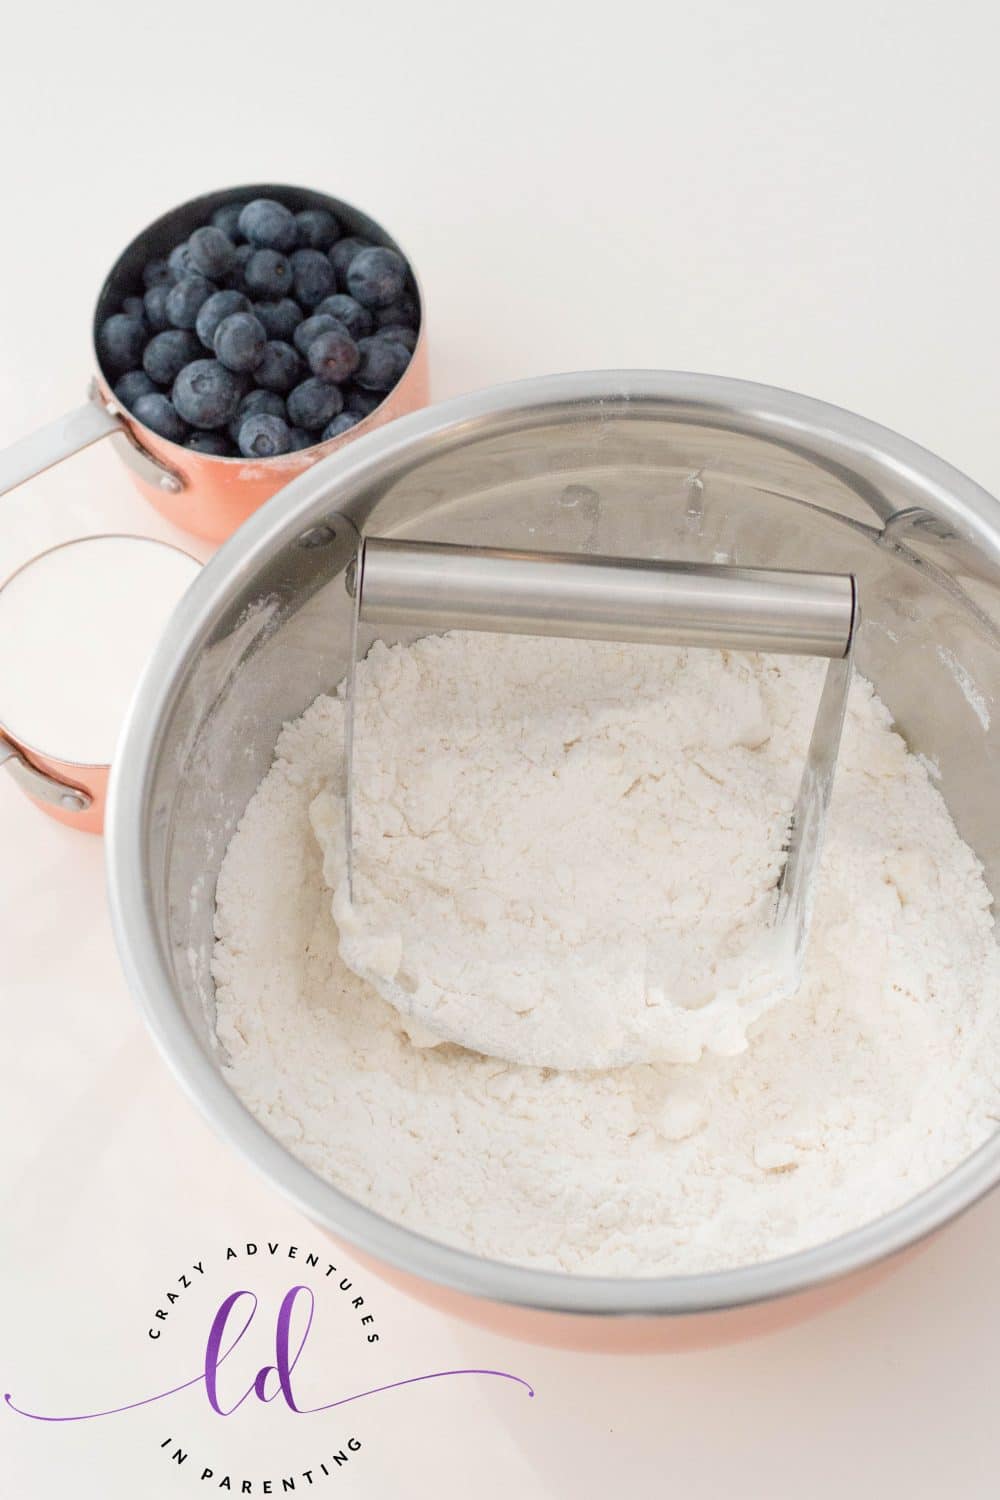 Use Pastry Cutter for Blueberry Scones